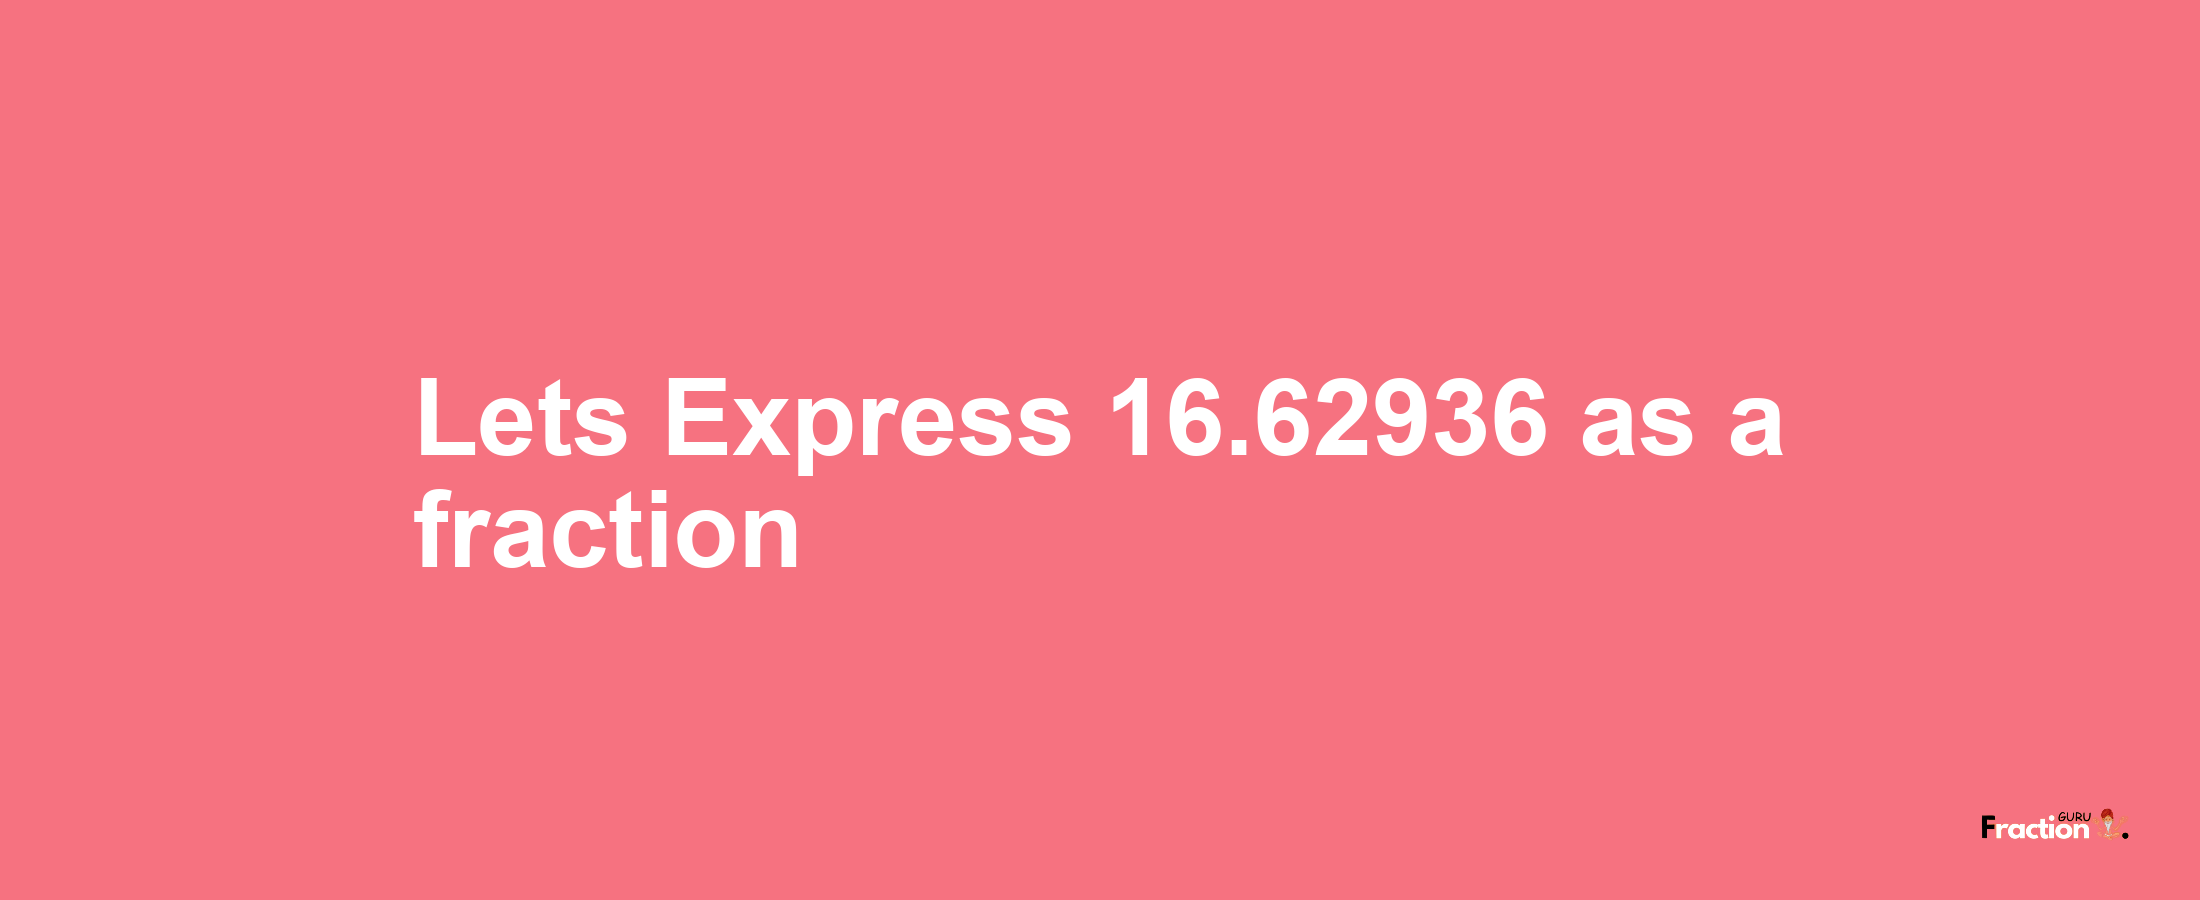 Lets Express 16.62936 as afraction